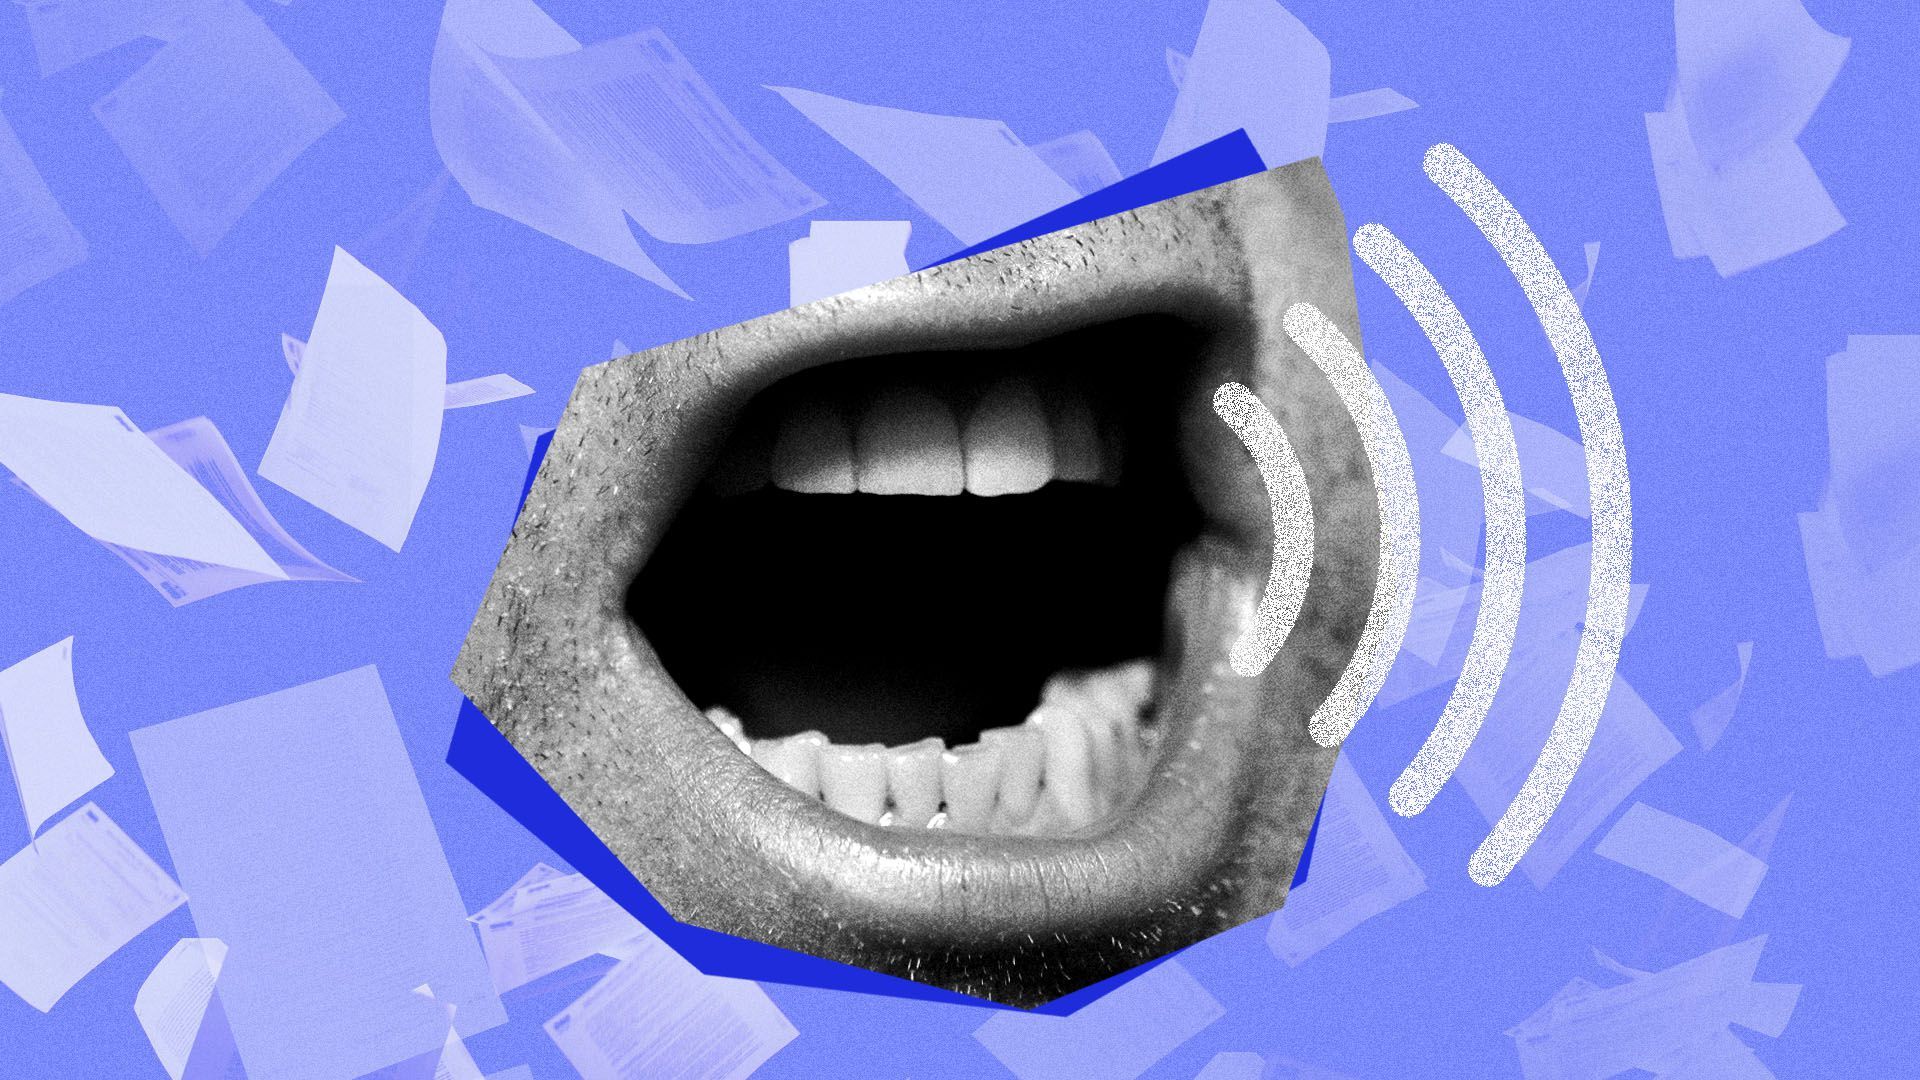 Illustration of an open mouth with the volume symbol next to it surrounded by falling papers